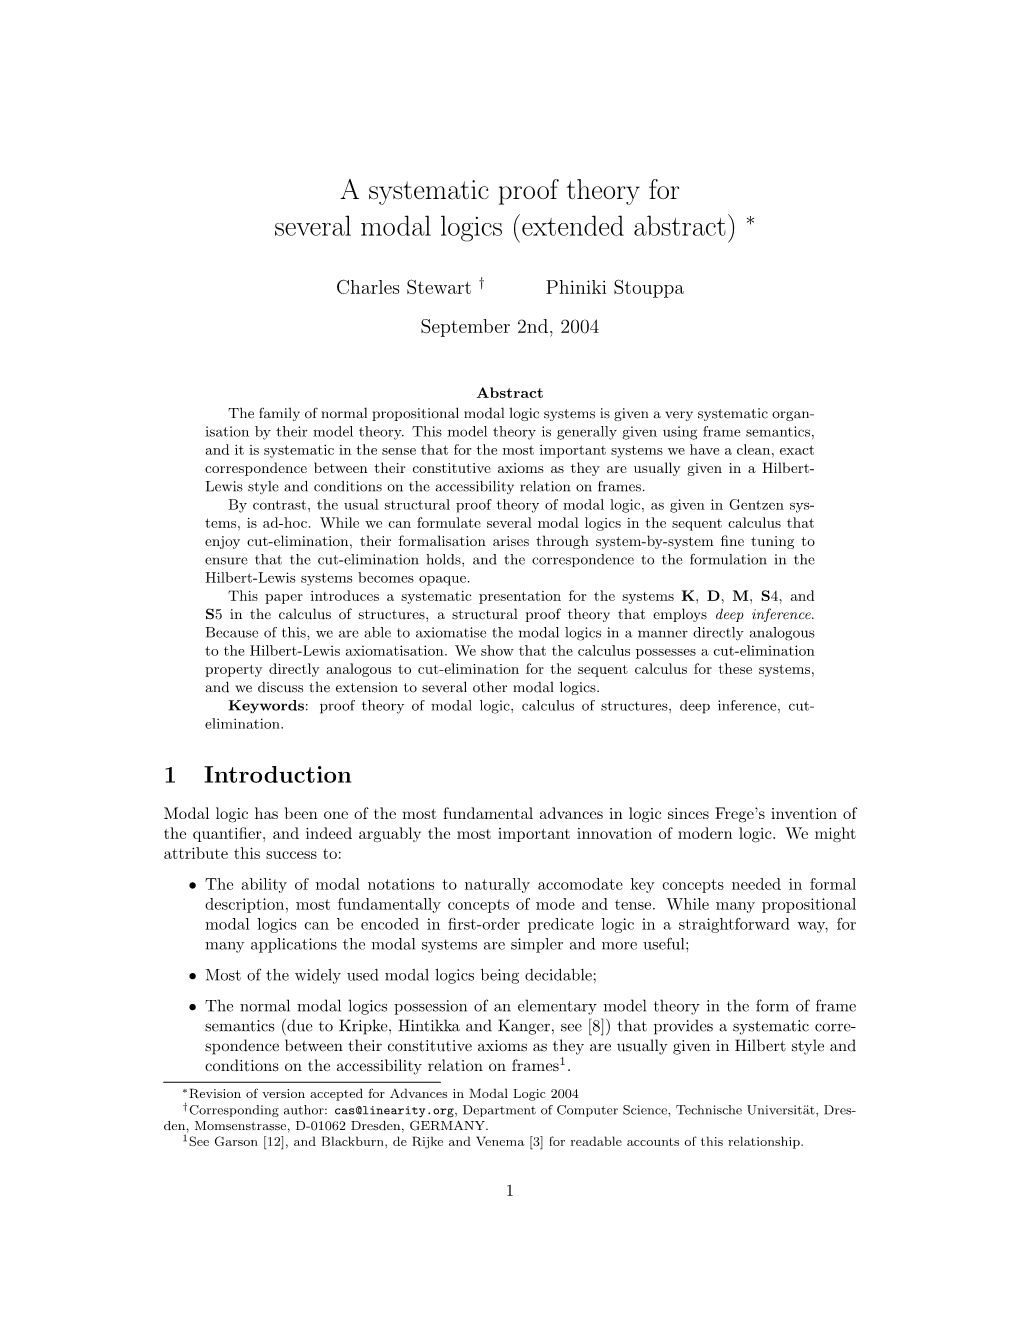 A Systematic Proof Theory for Several Modal Logics (Extended Abstract) ∗